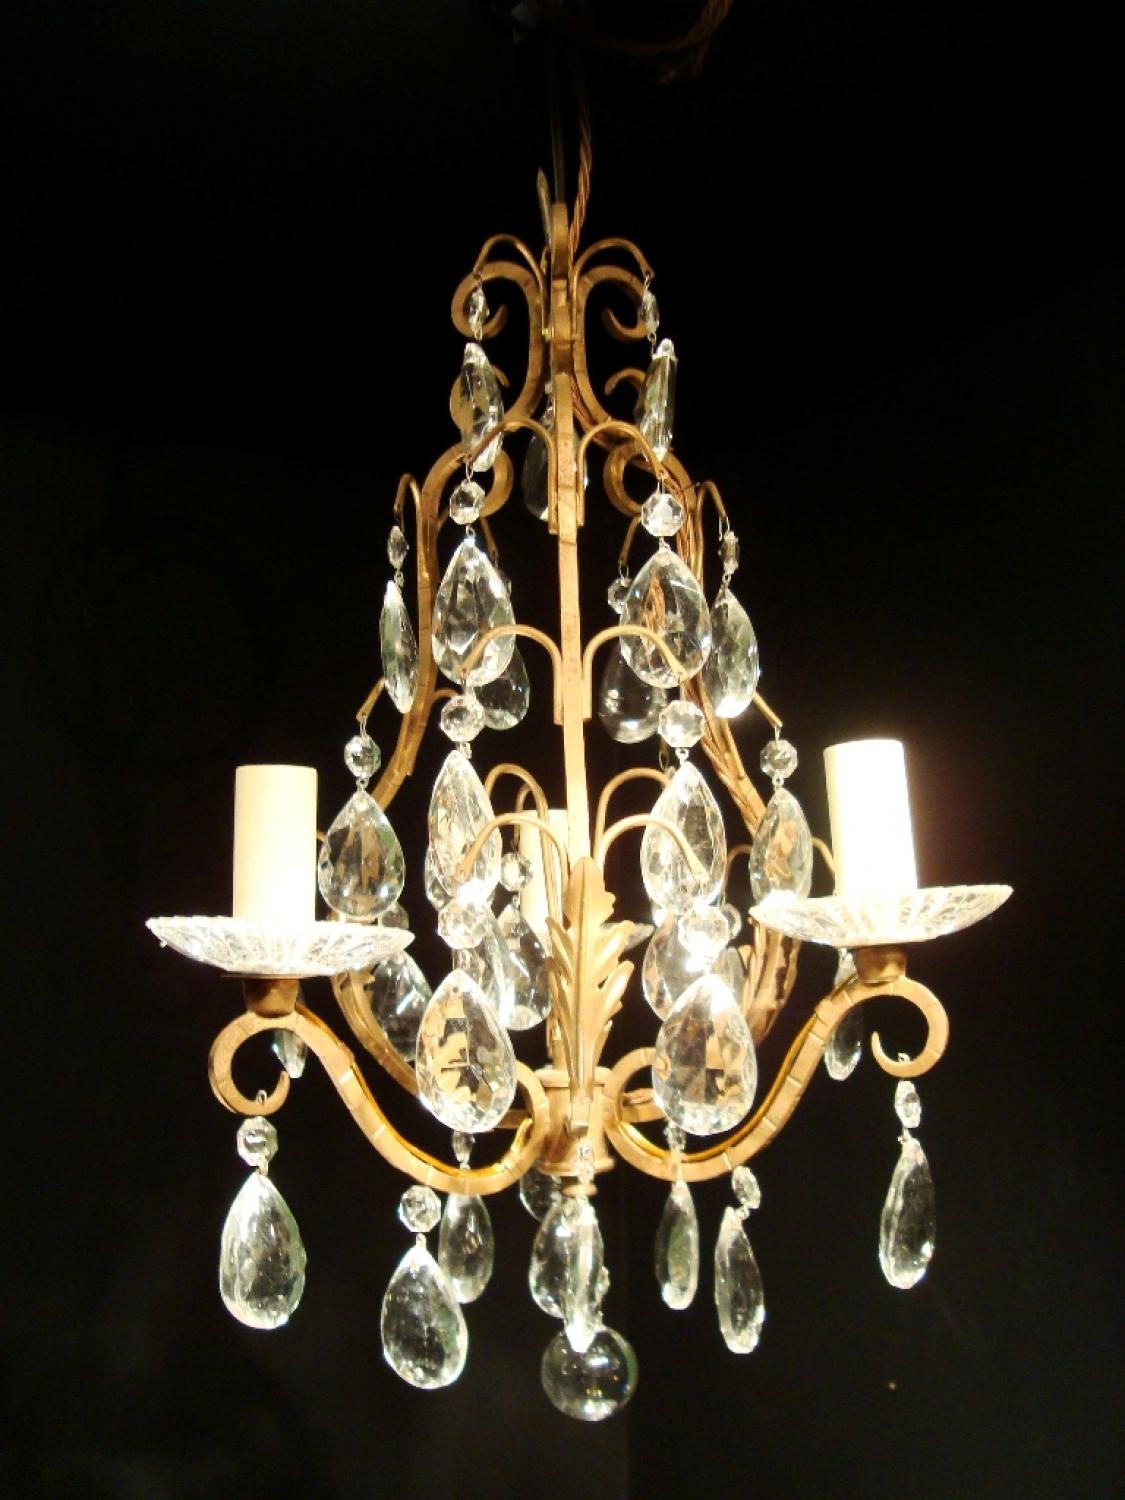 A small three arm chandelier